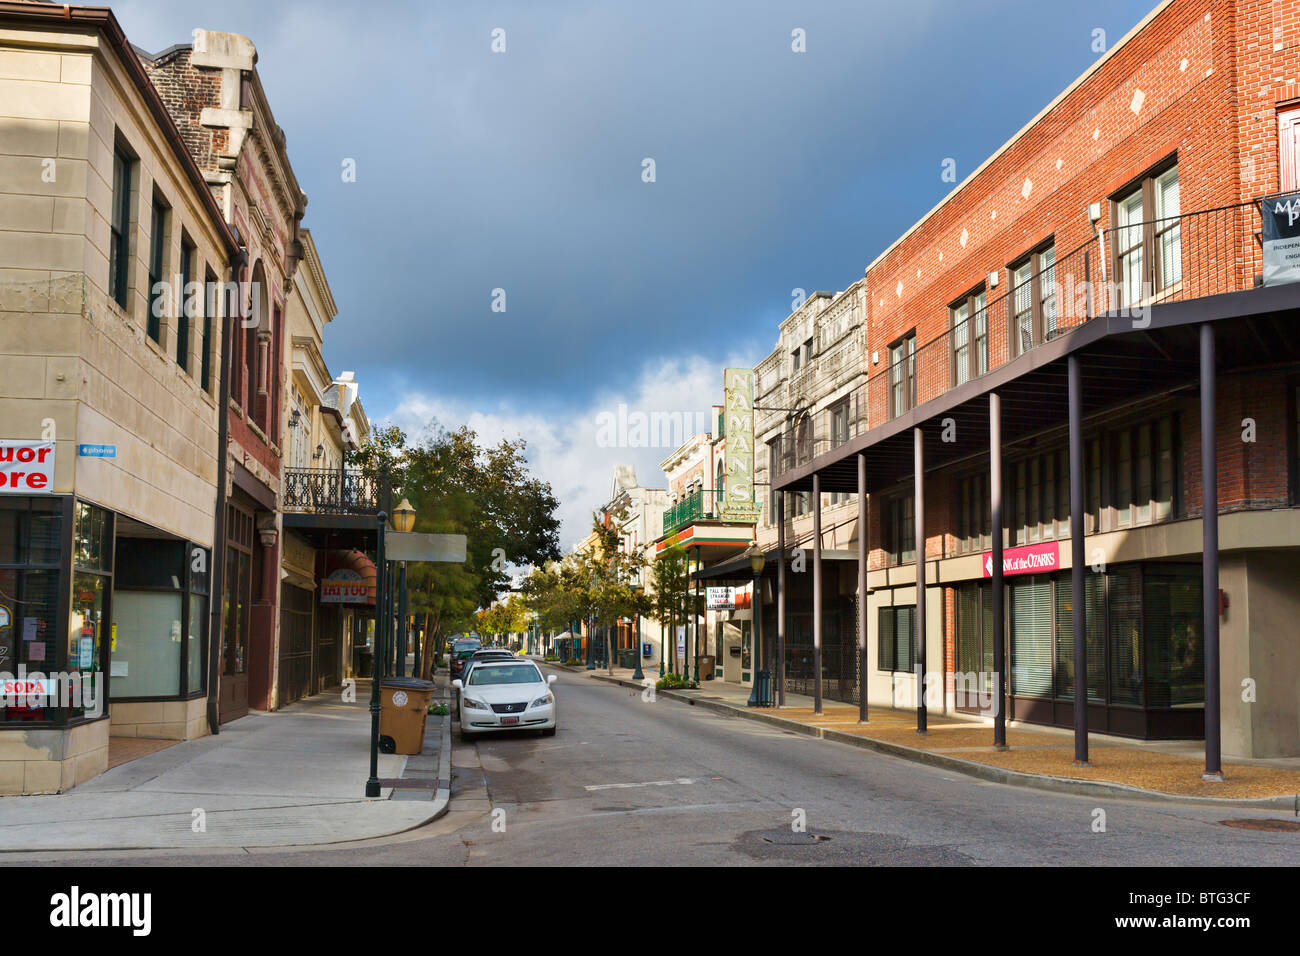 Dauphin Street in the historic old town, Mobile, Alabama, USA Stock Photo